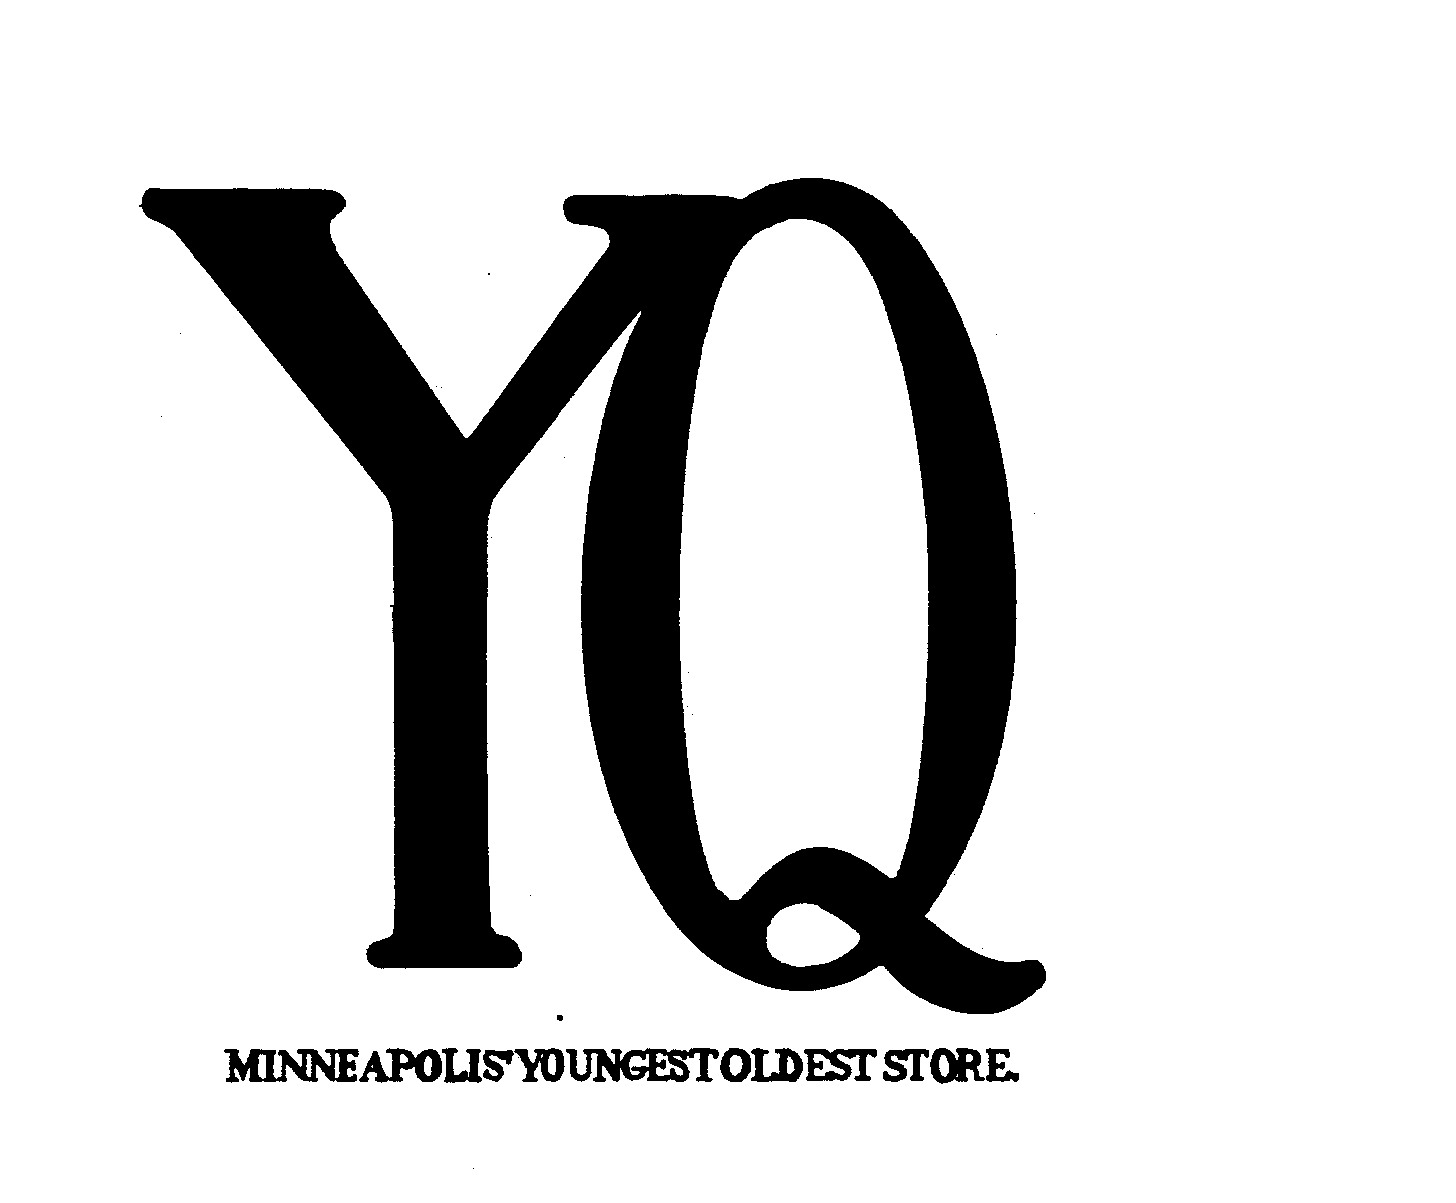  YQ MINNEAPOLIS' YOUNGEST OLDEST STORE.